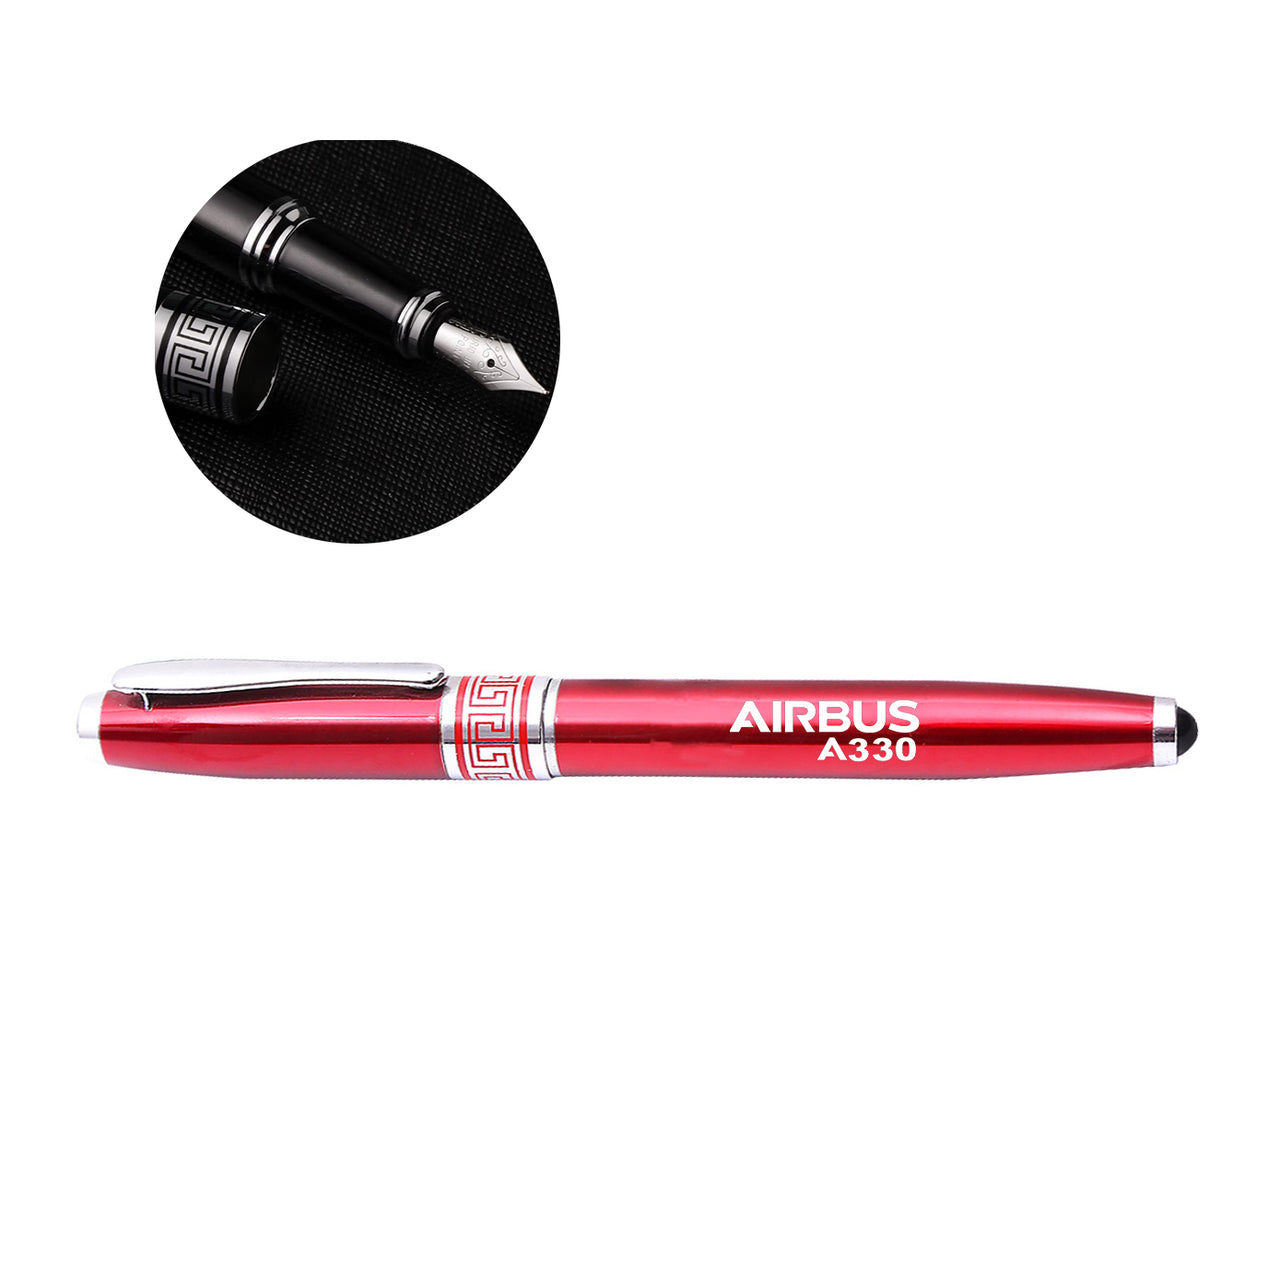 Airbus A330 & Text Designed Pens